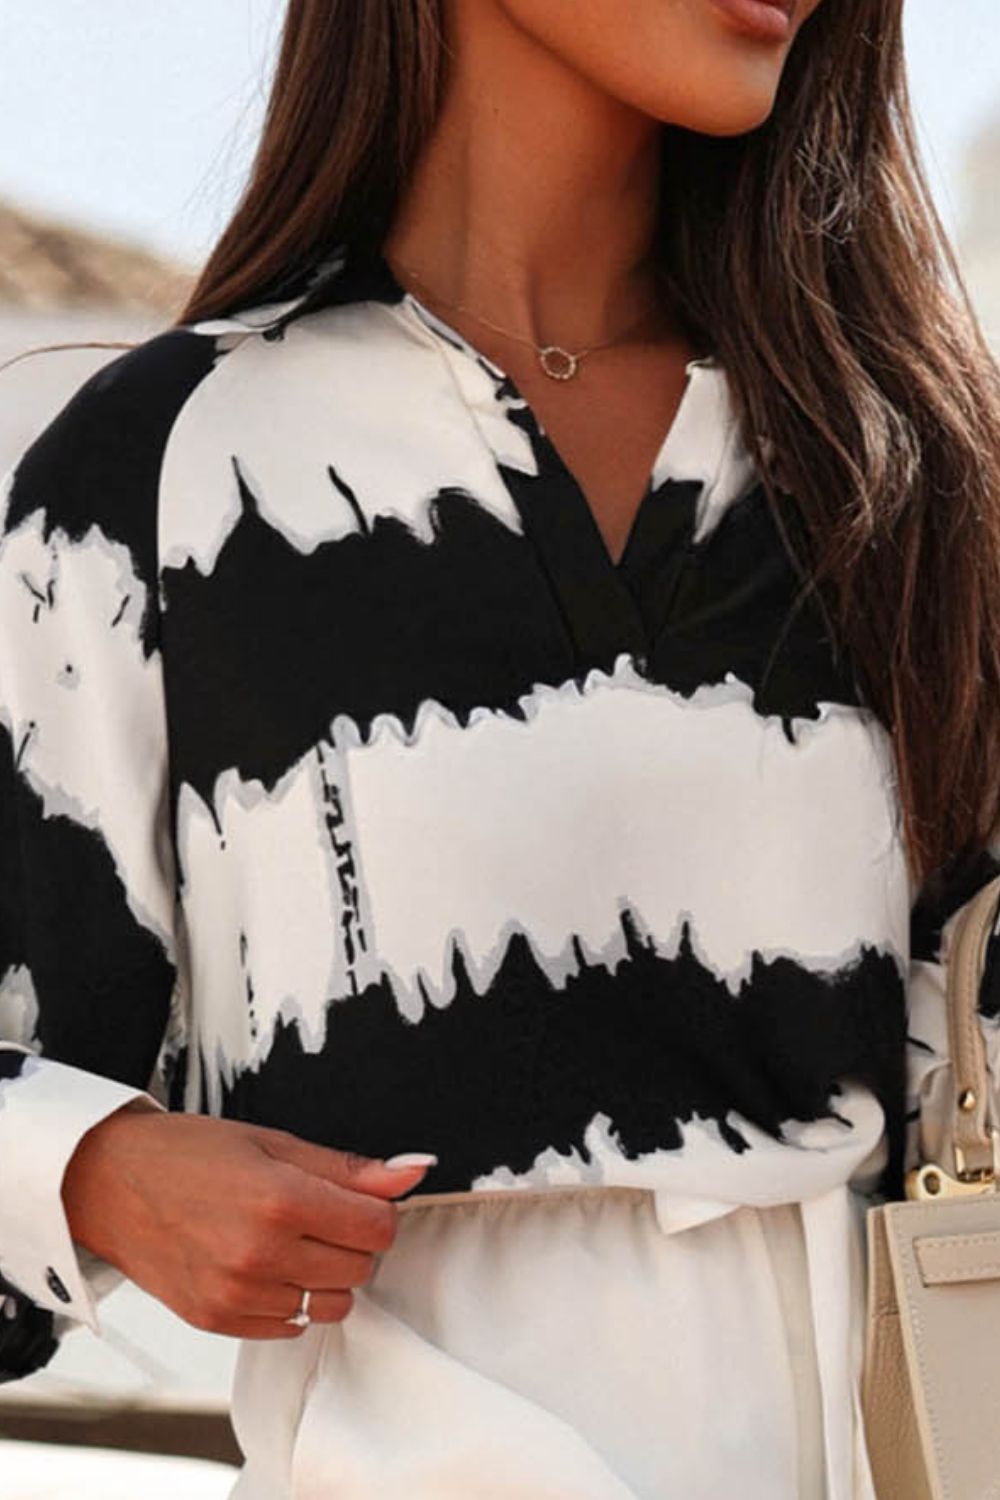 Black and White Stripe Women's Top  Printed Johnny Collar Long Sleeve Blouse